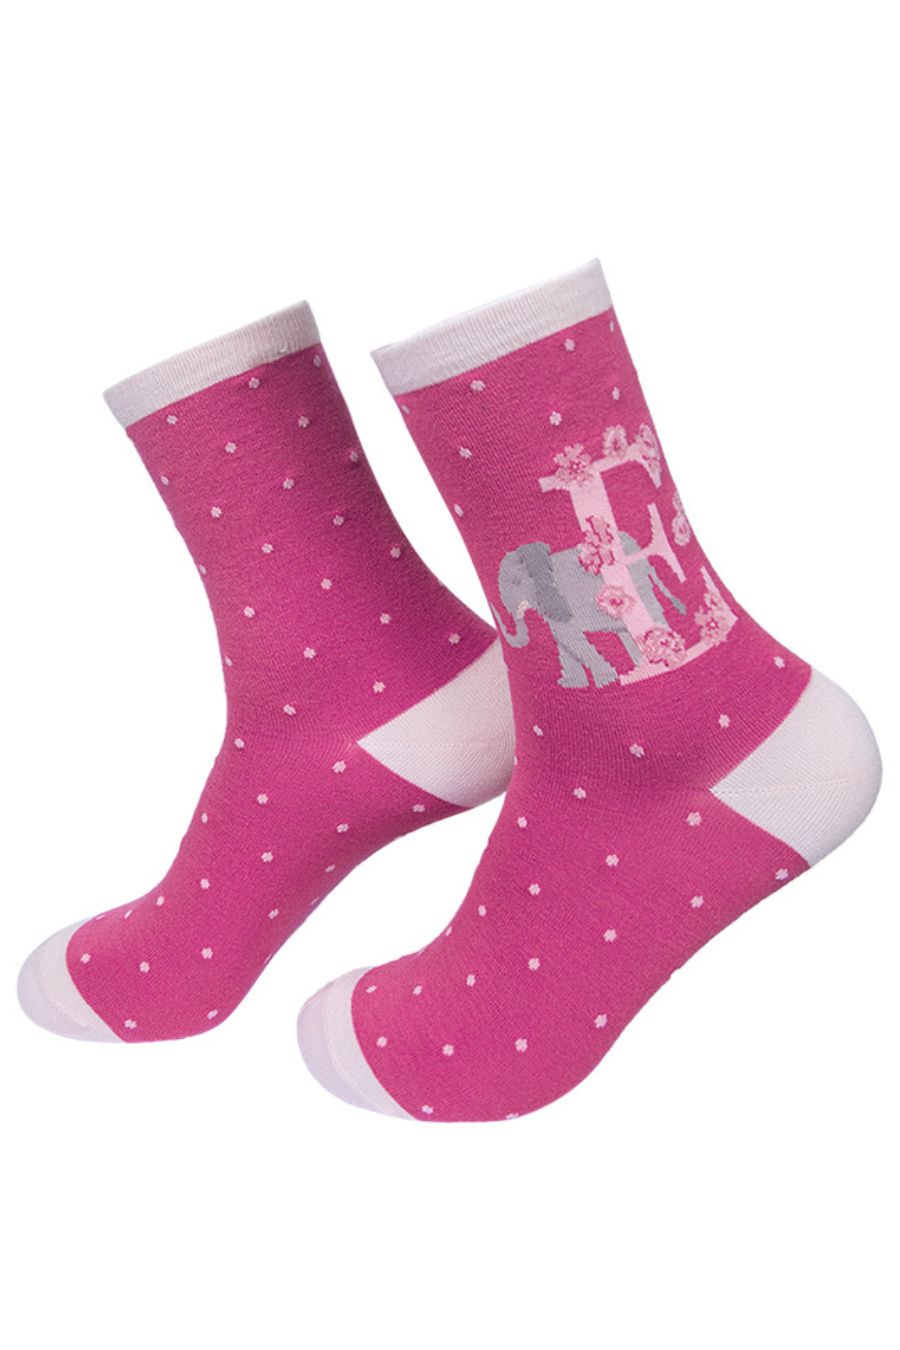 pink ankle socks with a letter E and and elephant